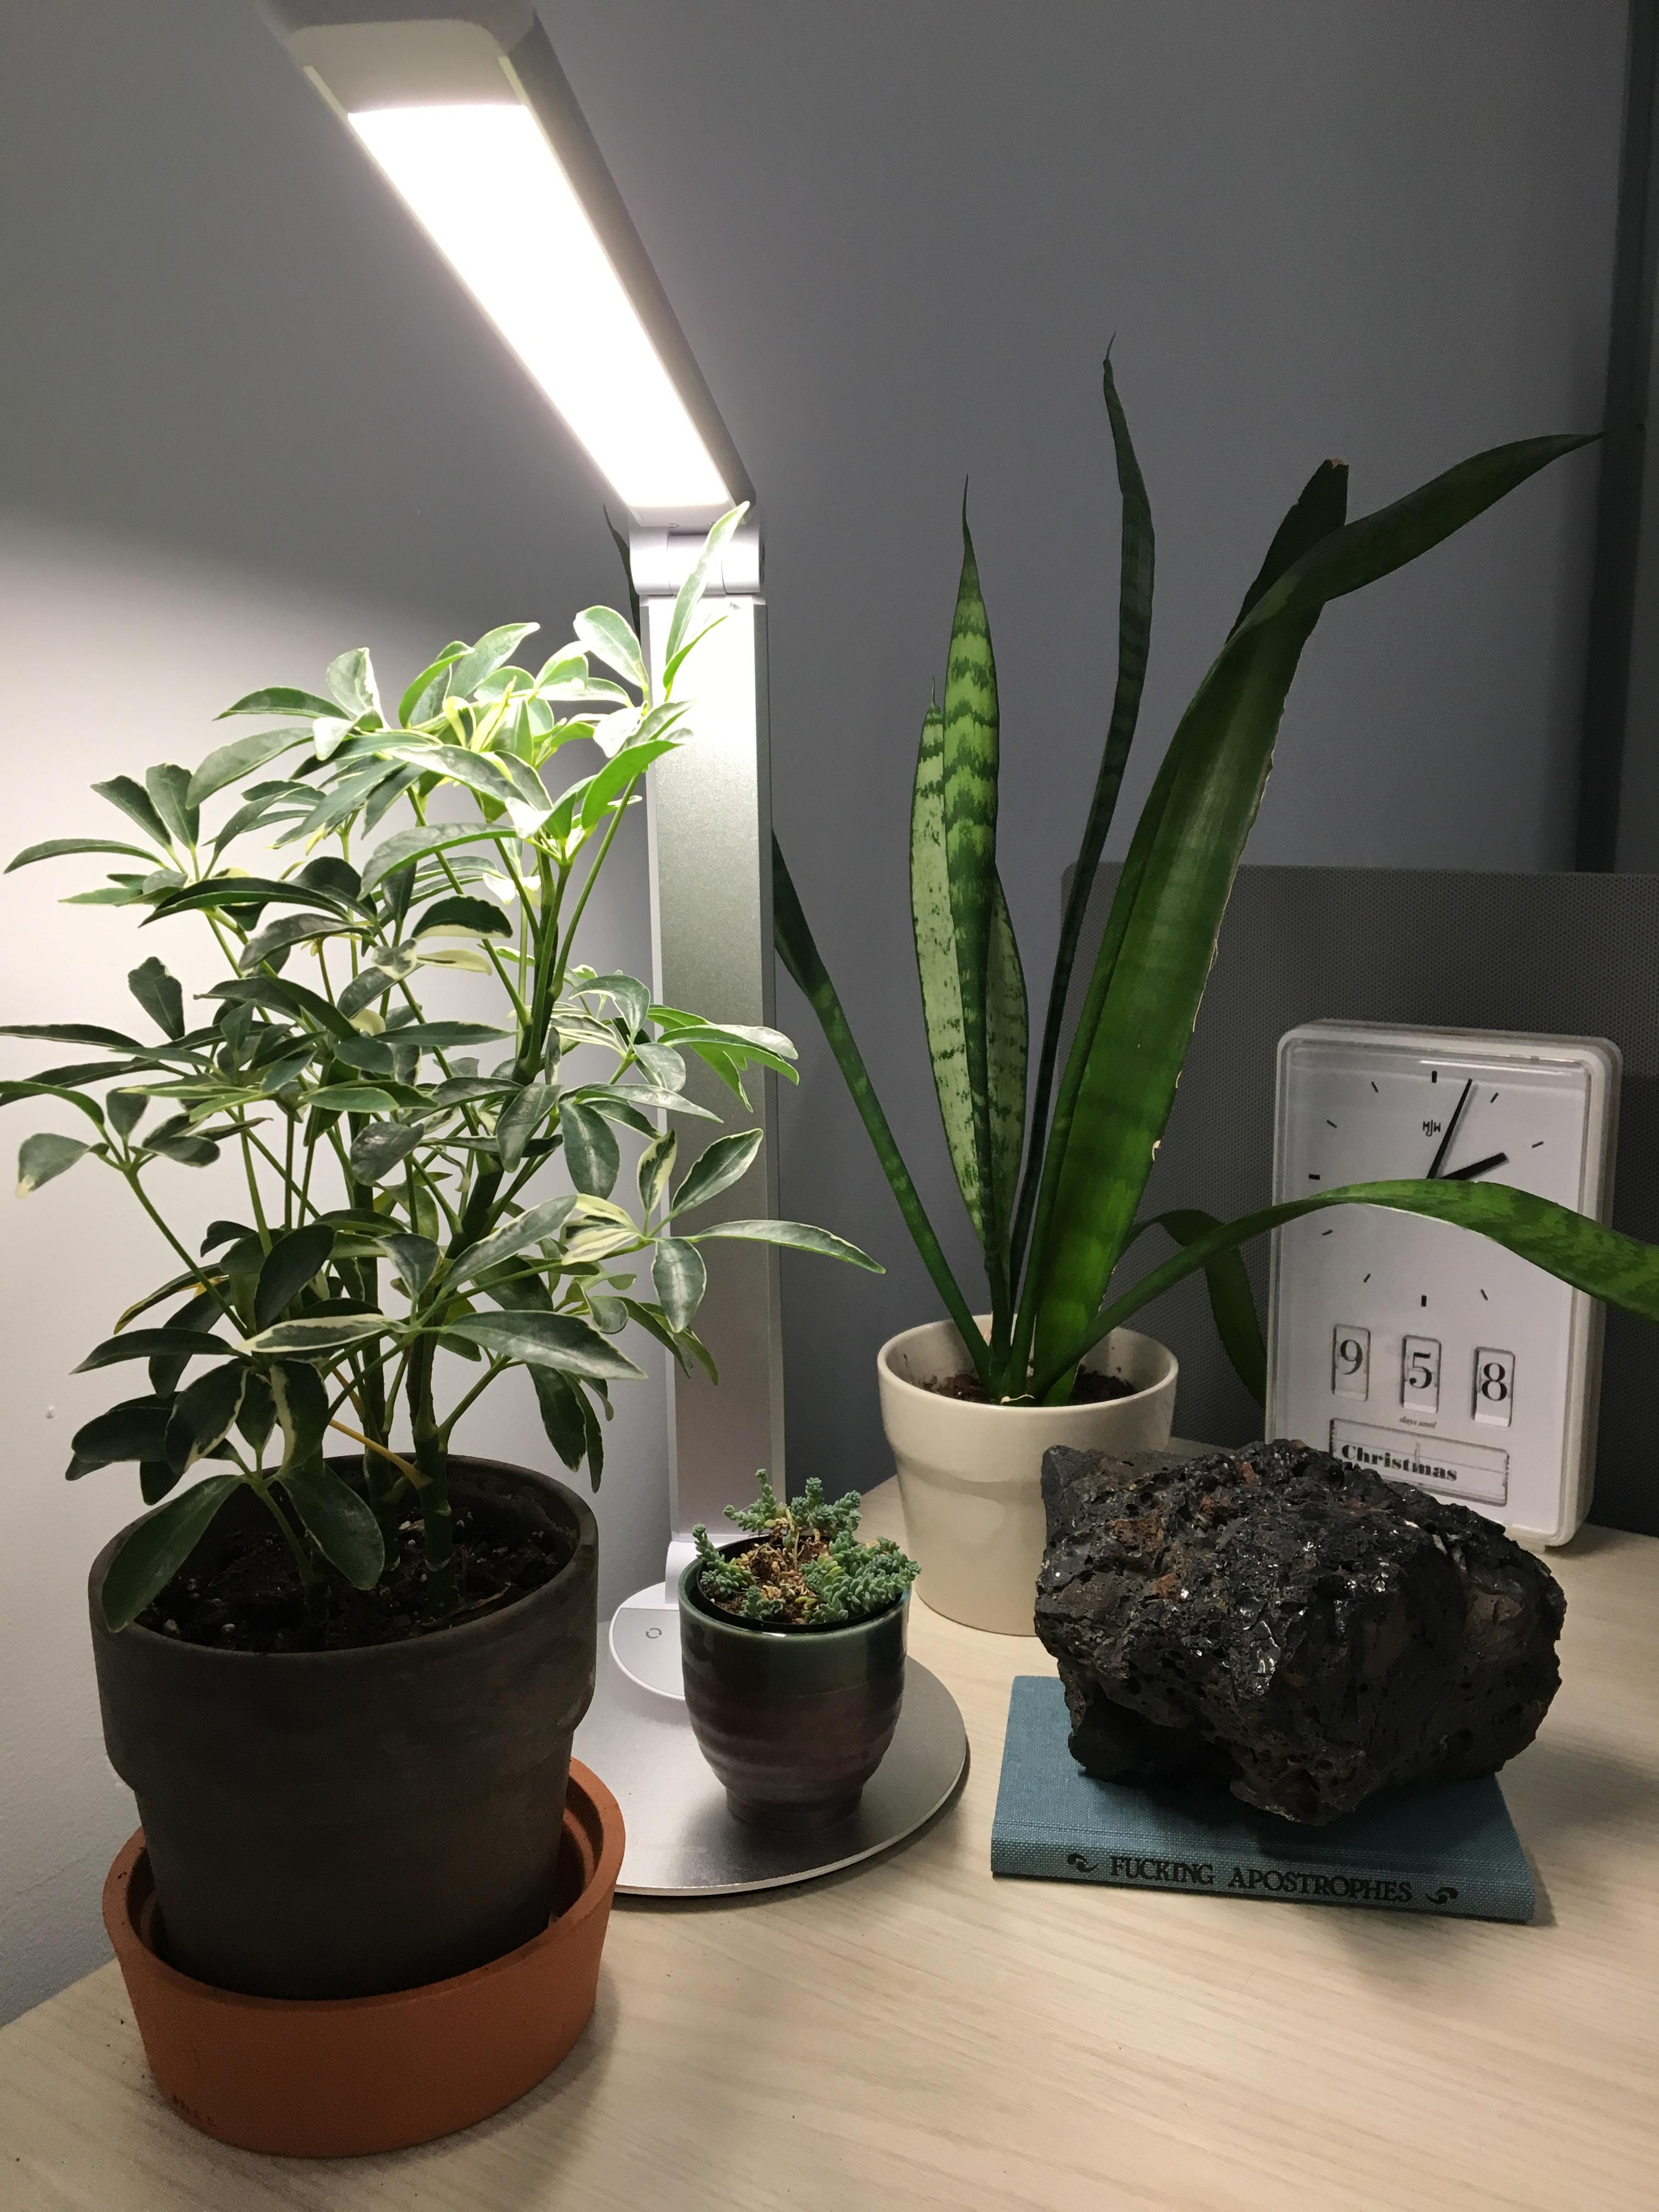 Three plants, a rectangular clock, and a rock sit on an office desk, illuminated by a minimal, LED desk light.